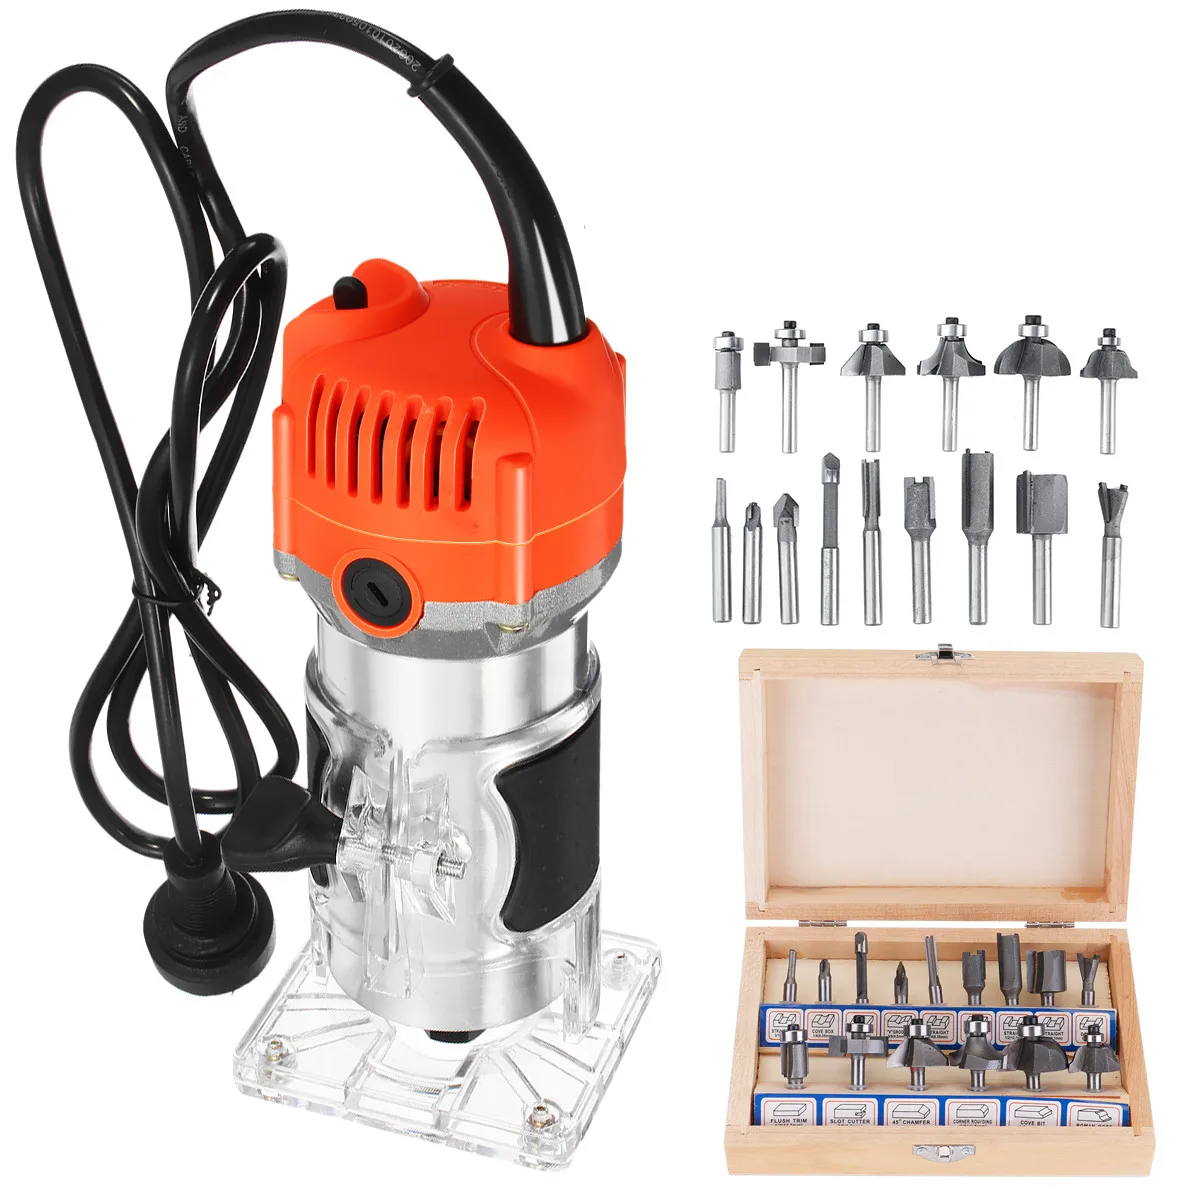 

110V/220V 1400W 40000Rpm Wood Electric Trimmer Wood Laminate Palm Router Electric Hand Trimmer Edge Joiners Woodworking Tool